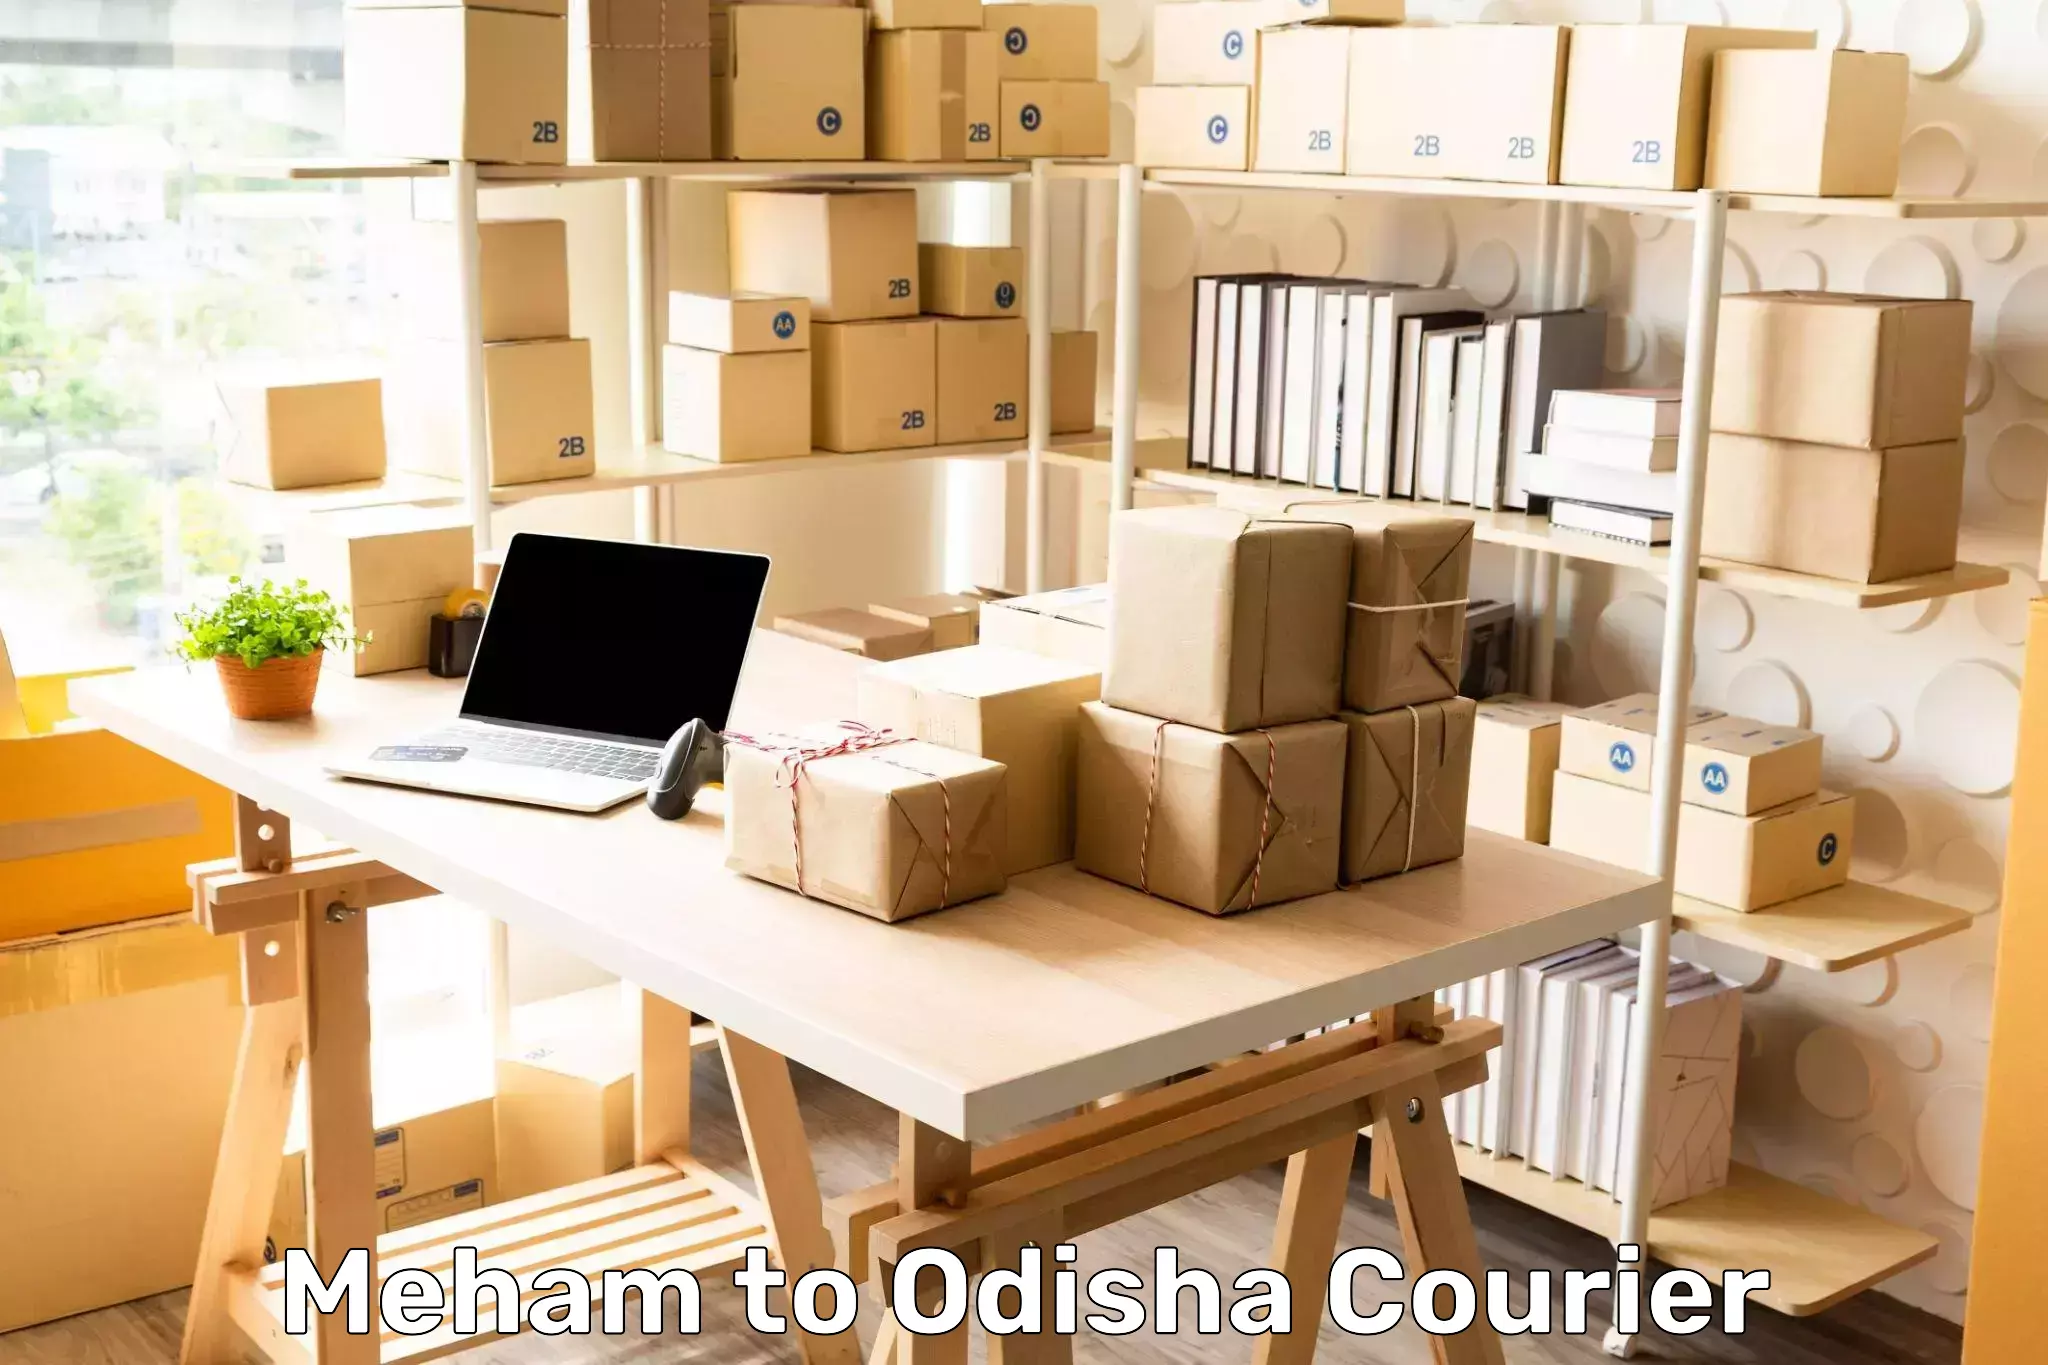 Personalized courier experiences Meham to Odisha